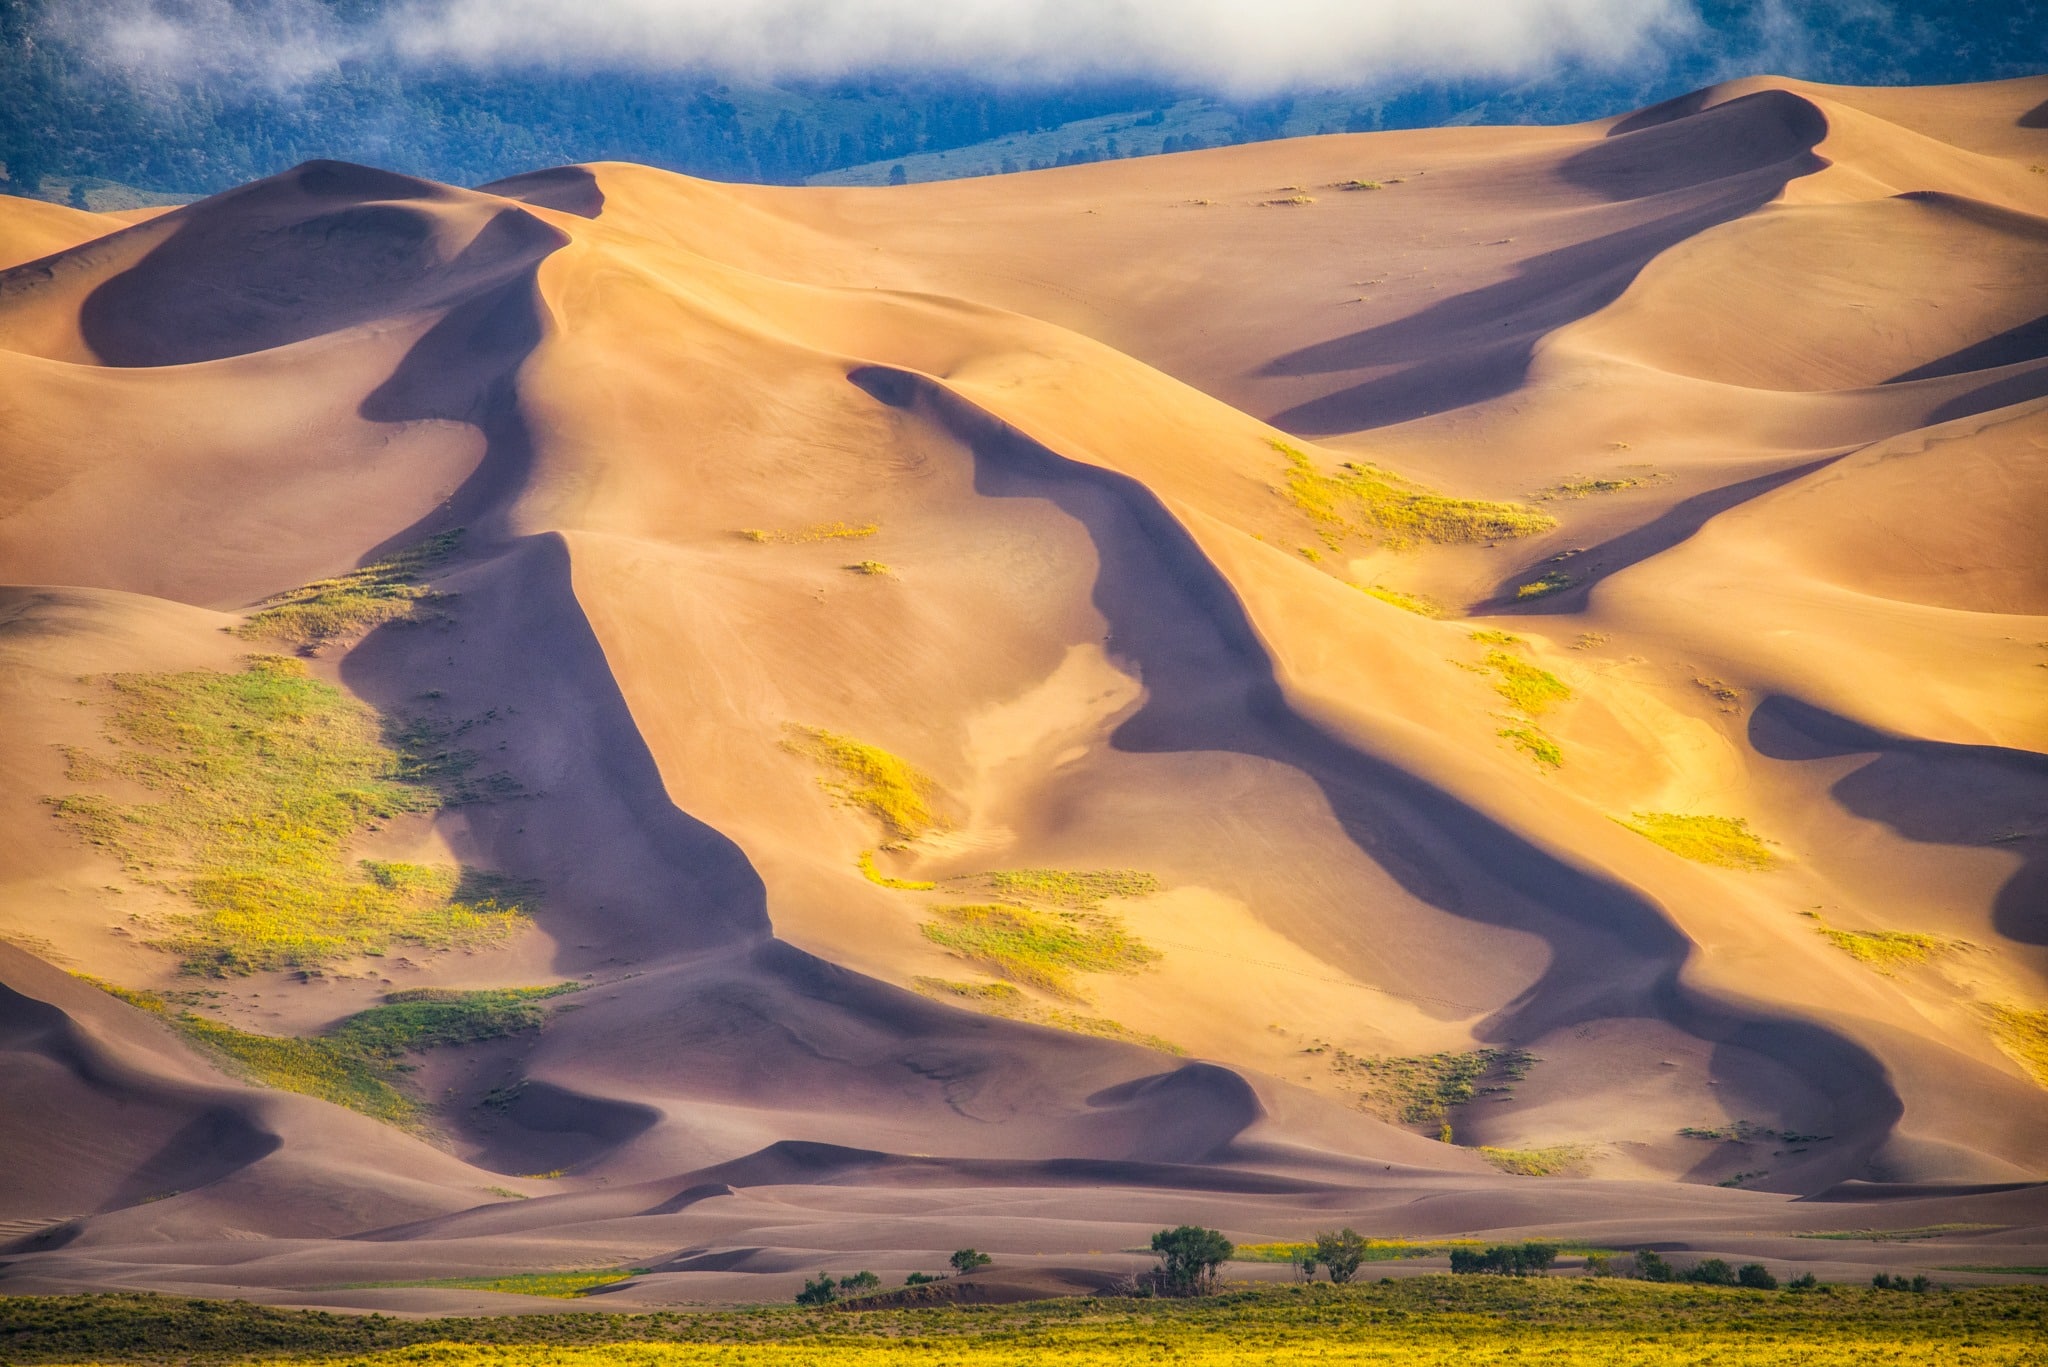 The clouds have just cleared the Great Sand Dunes, allowing the morning light to enhance their texture.